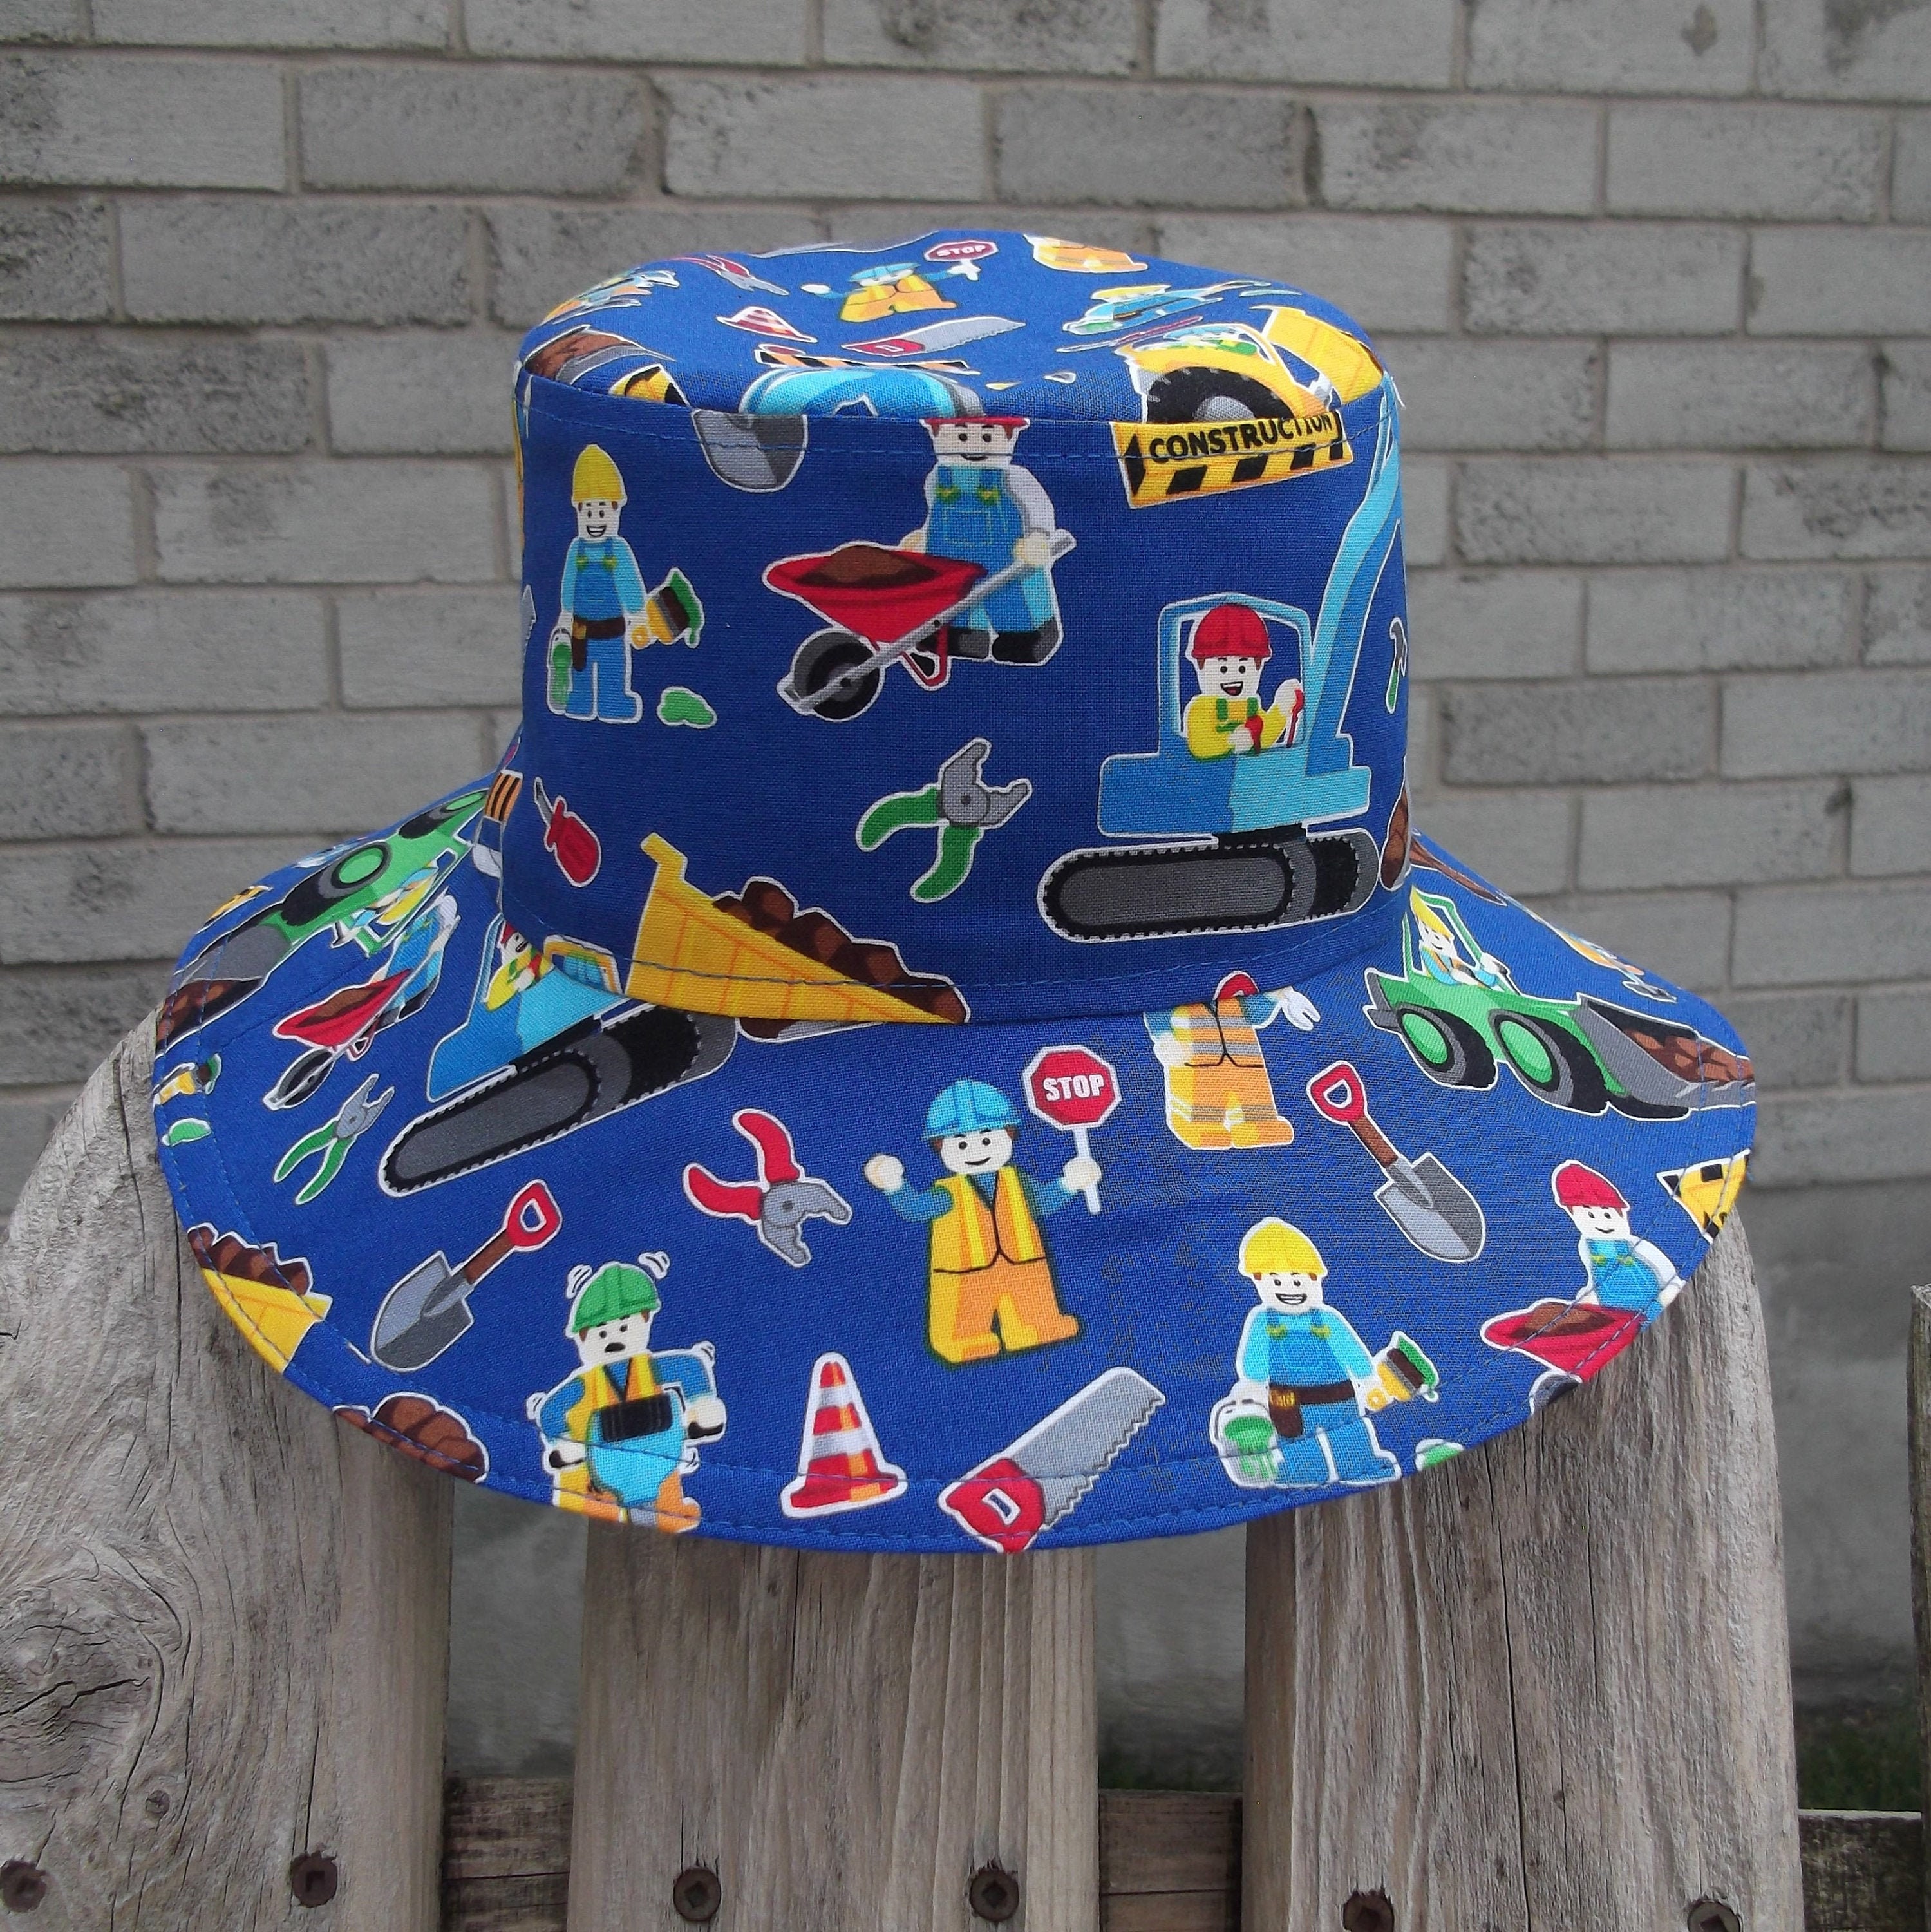 Construction Child's Bucket Hat Various -  Canada